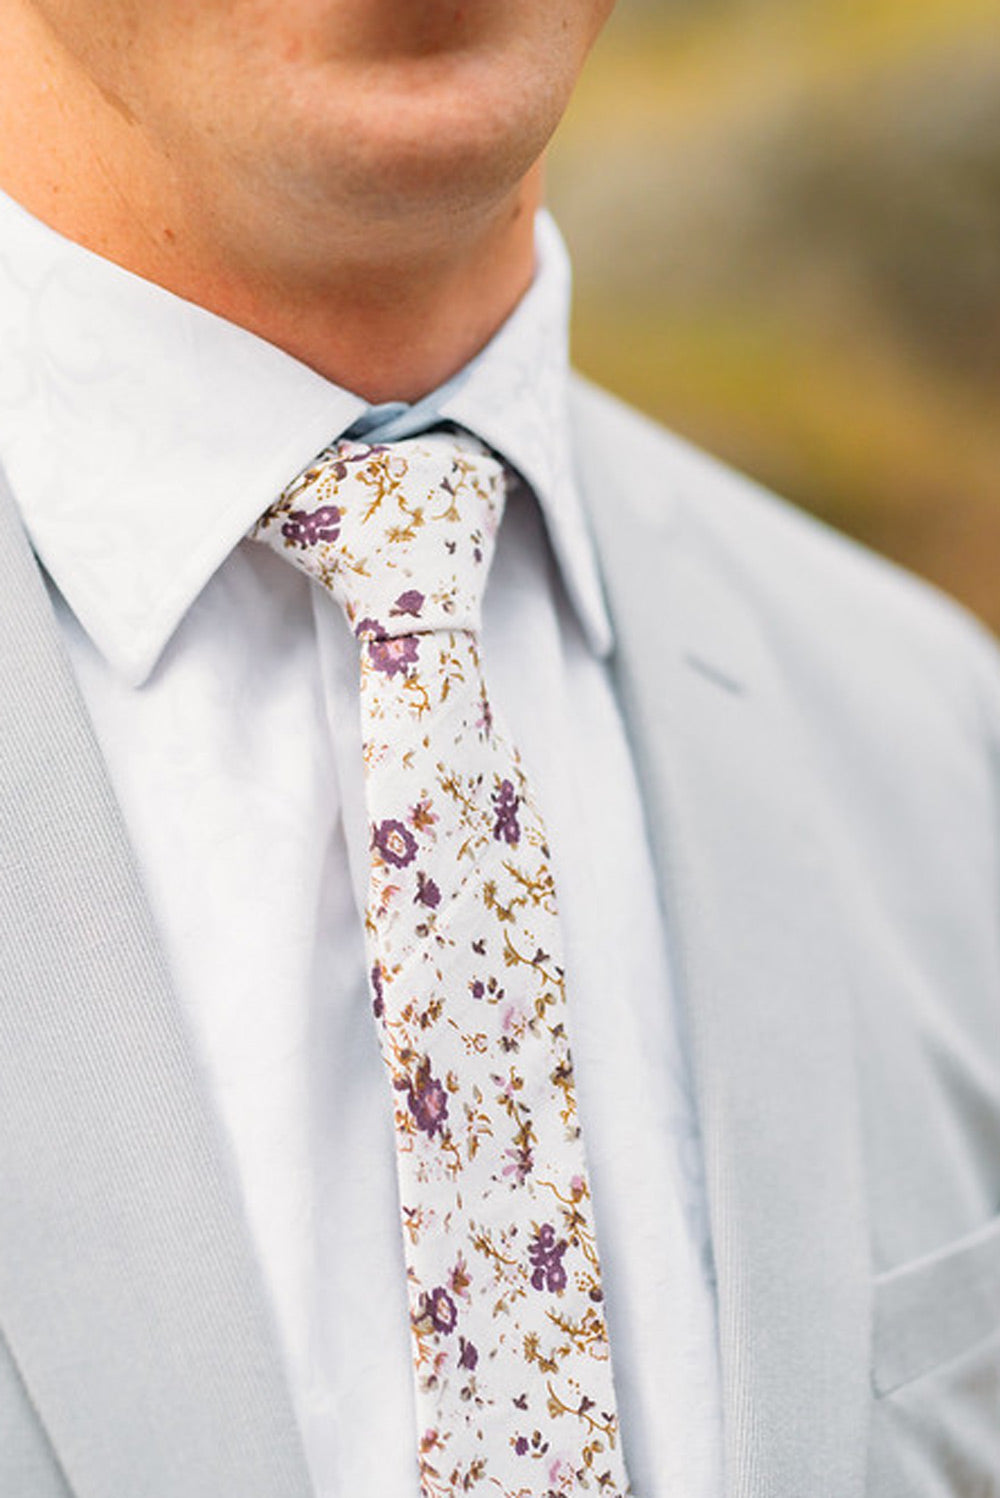 Sweetly Picked tie worn with a white shirt and light gray suit jacket.